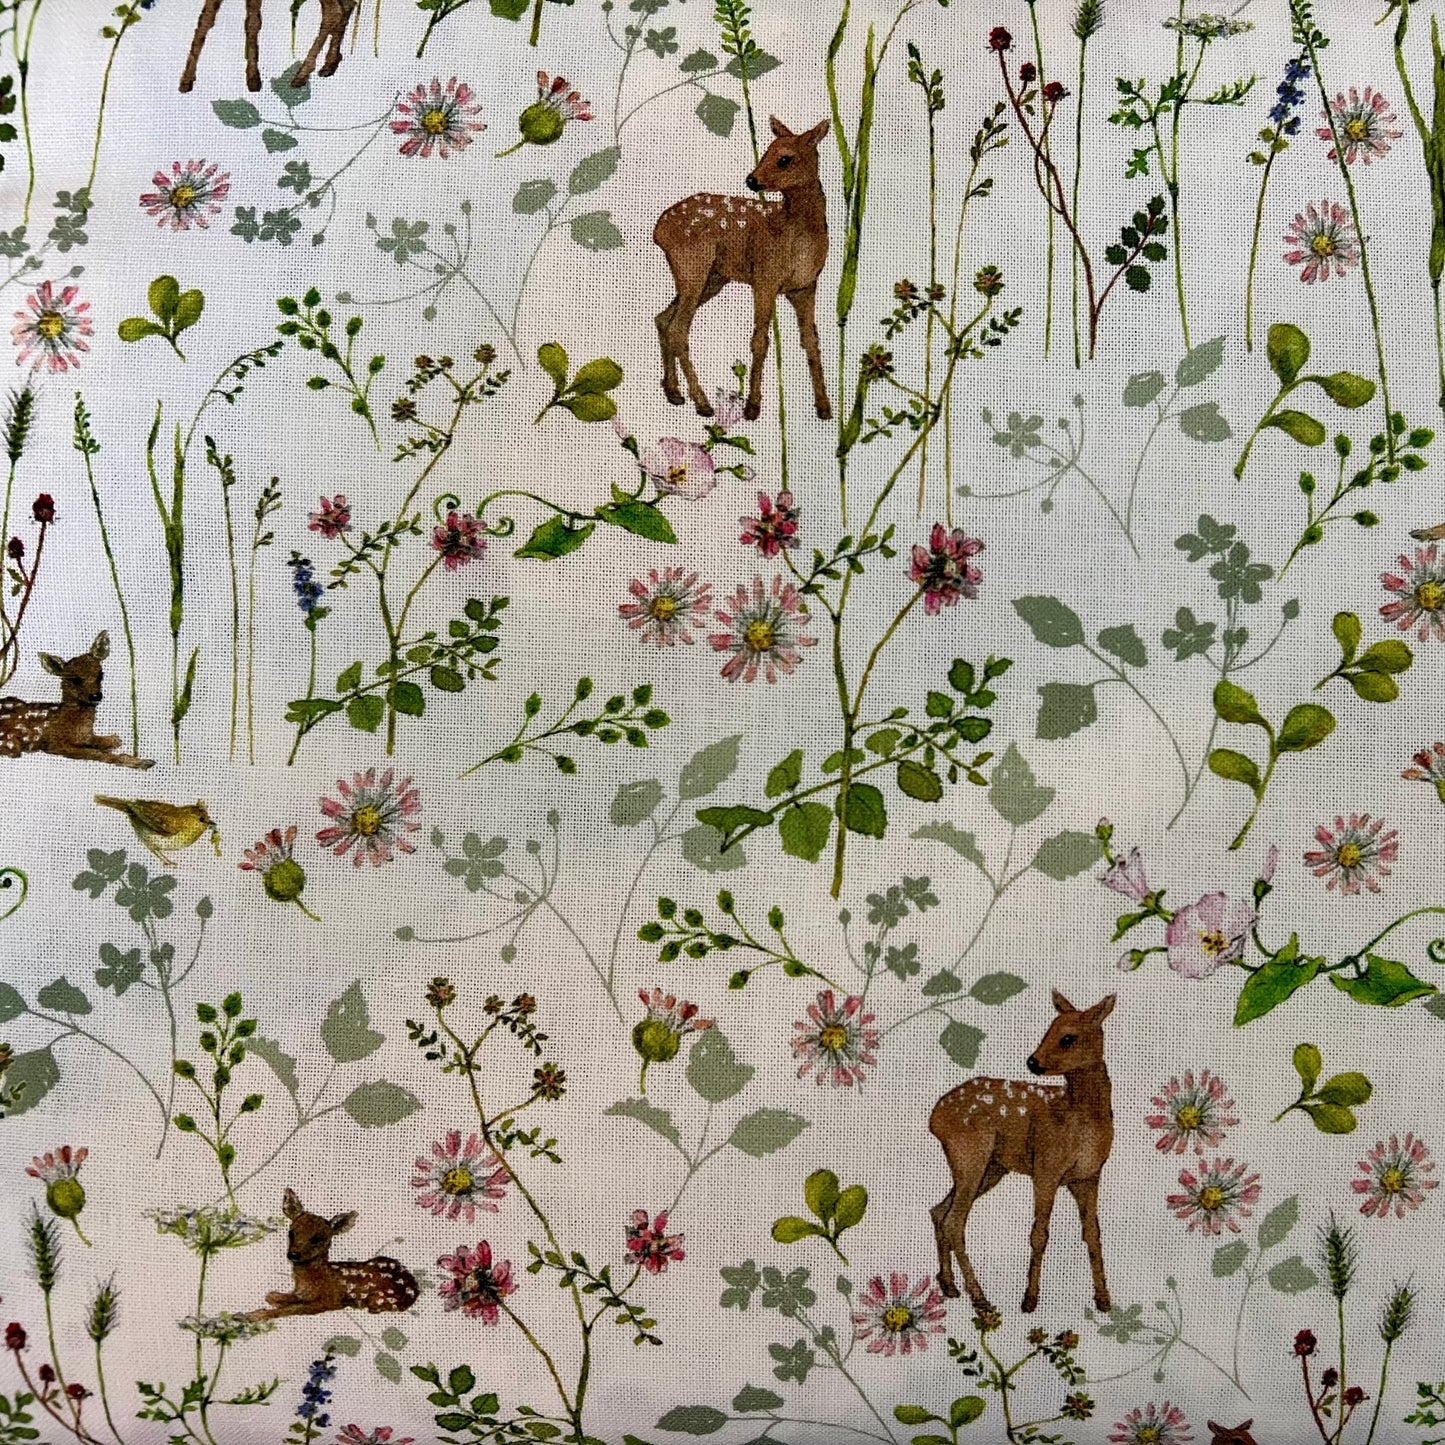 Deer and Daisy